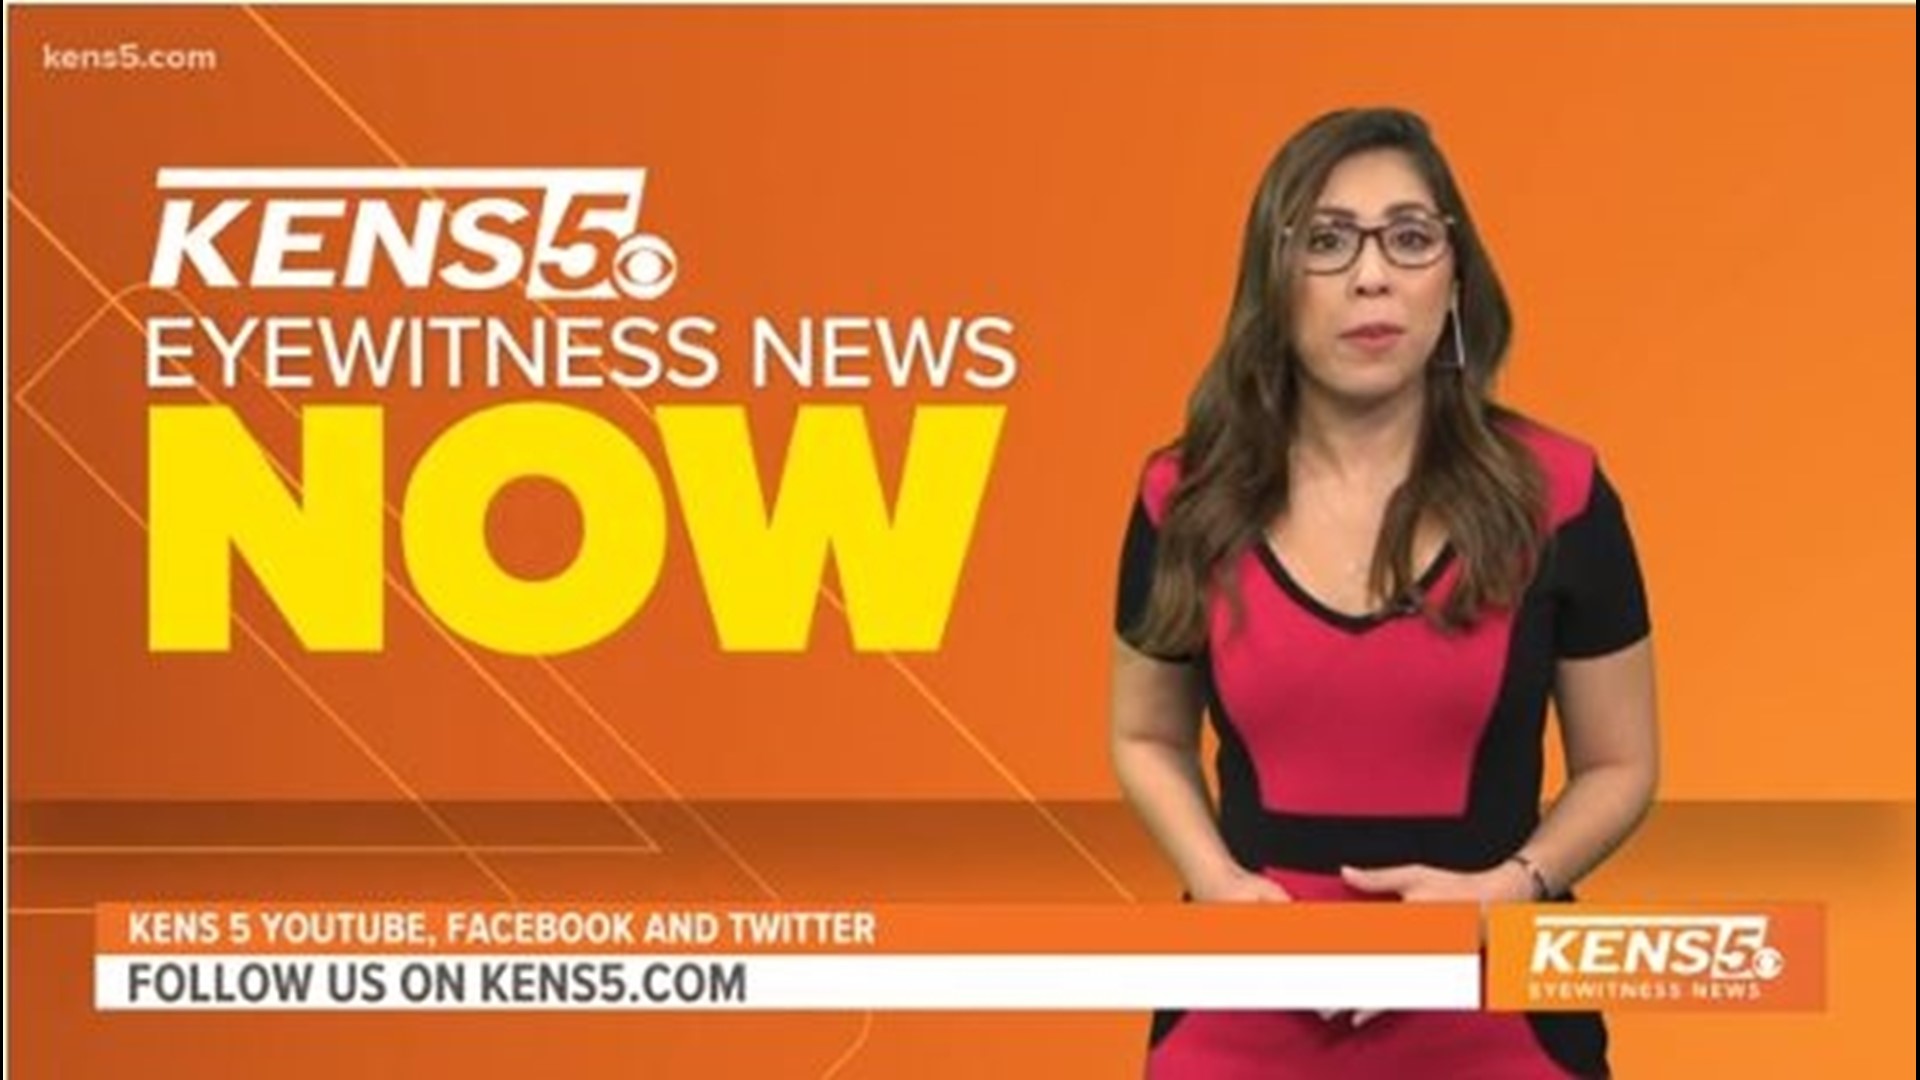 Follow us here to get the latest with the KENS 5 morning team every weekday.